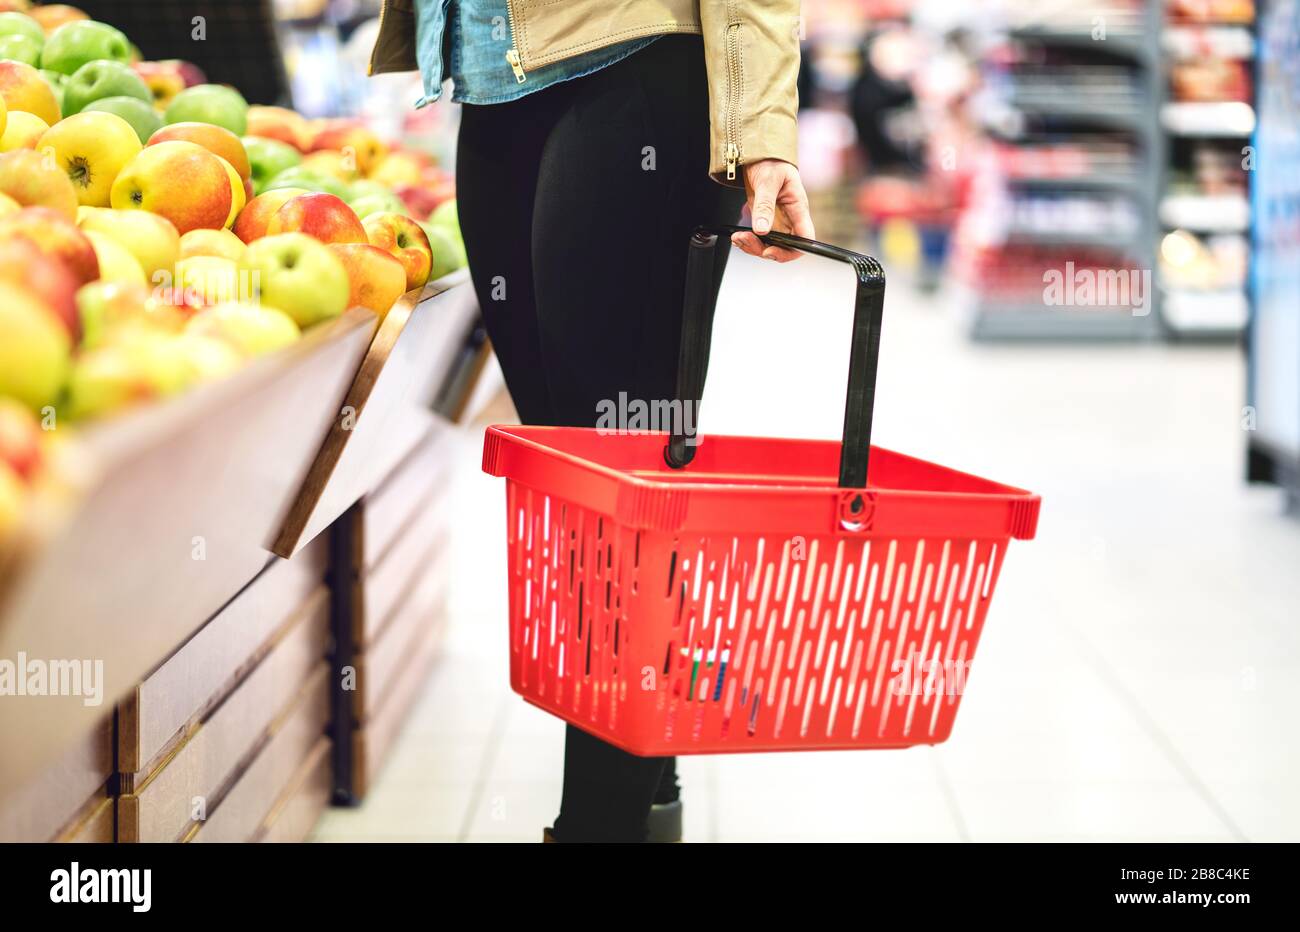 Retail, sale and consumerism concept. Customer in supermarket vegetable and fruit section choosing healthy food. Woman holding shopping basket. Stock Photo